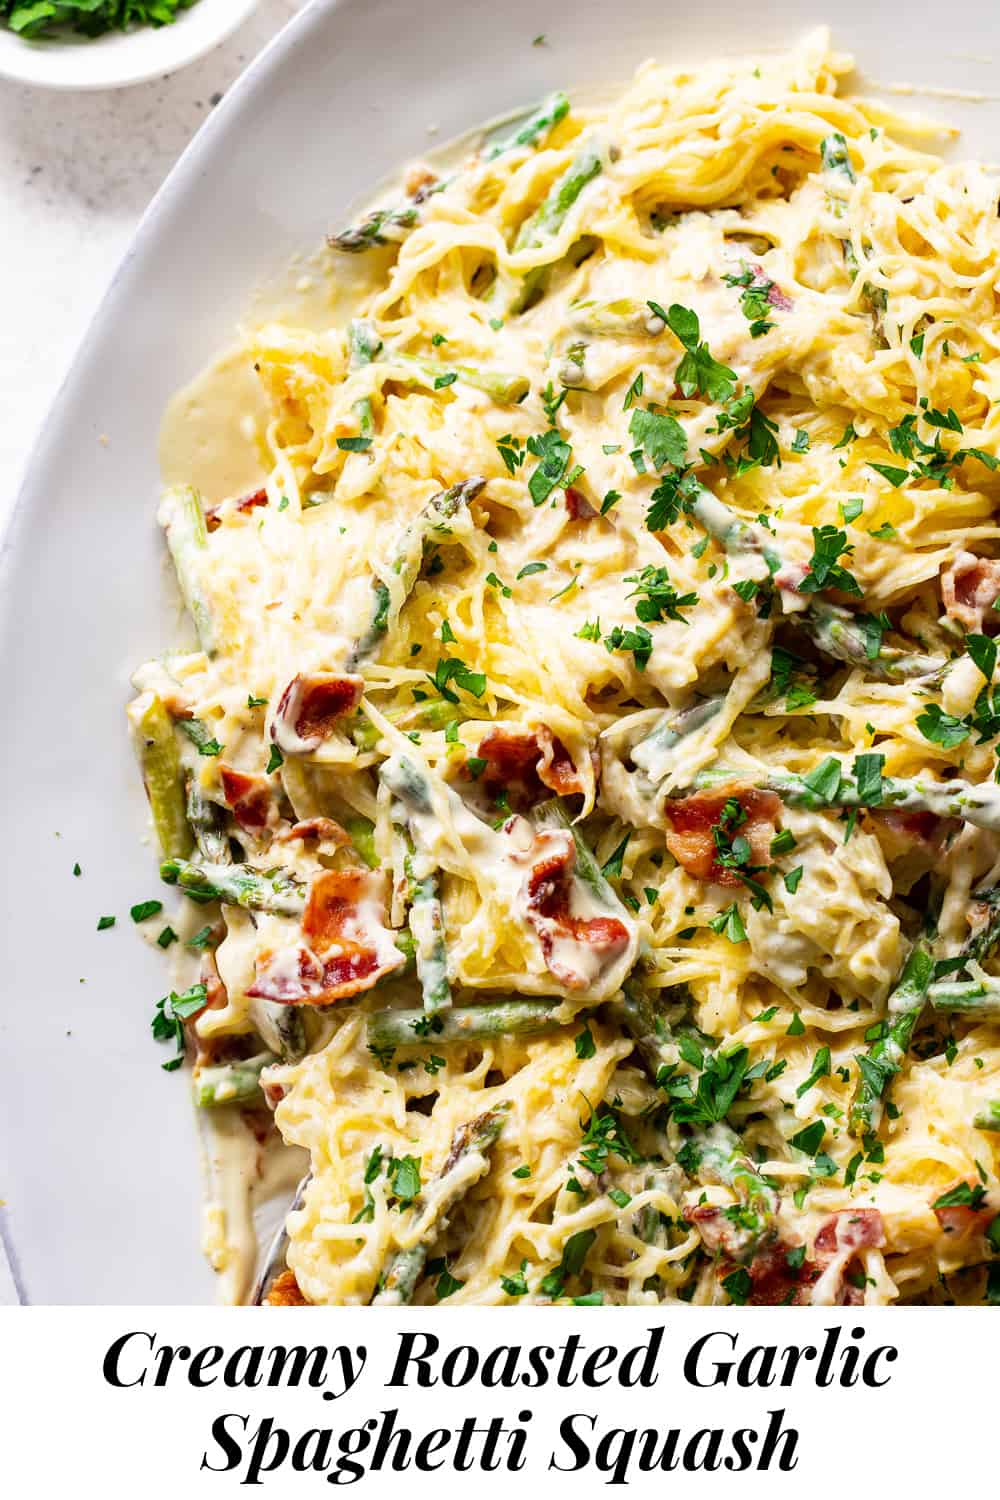 This roasted garlic spaghetti squash has a creamy savory sauce with crispy bacon plus sautéed asparagus. It’s flavor packed, low in carbs, paleo and Whole30 friendly. #paleo #whole30 #keto #lowcarb #cleaneating